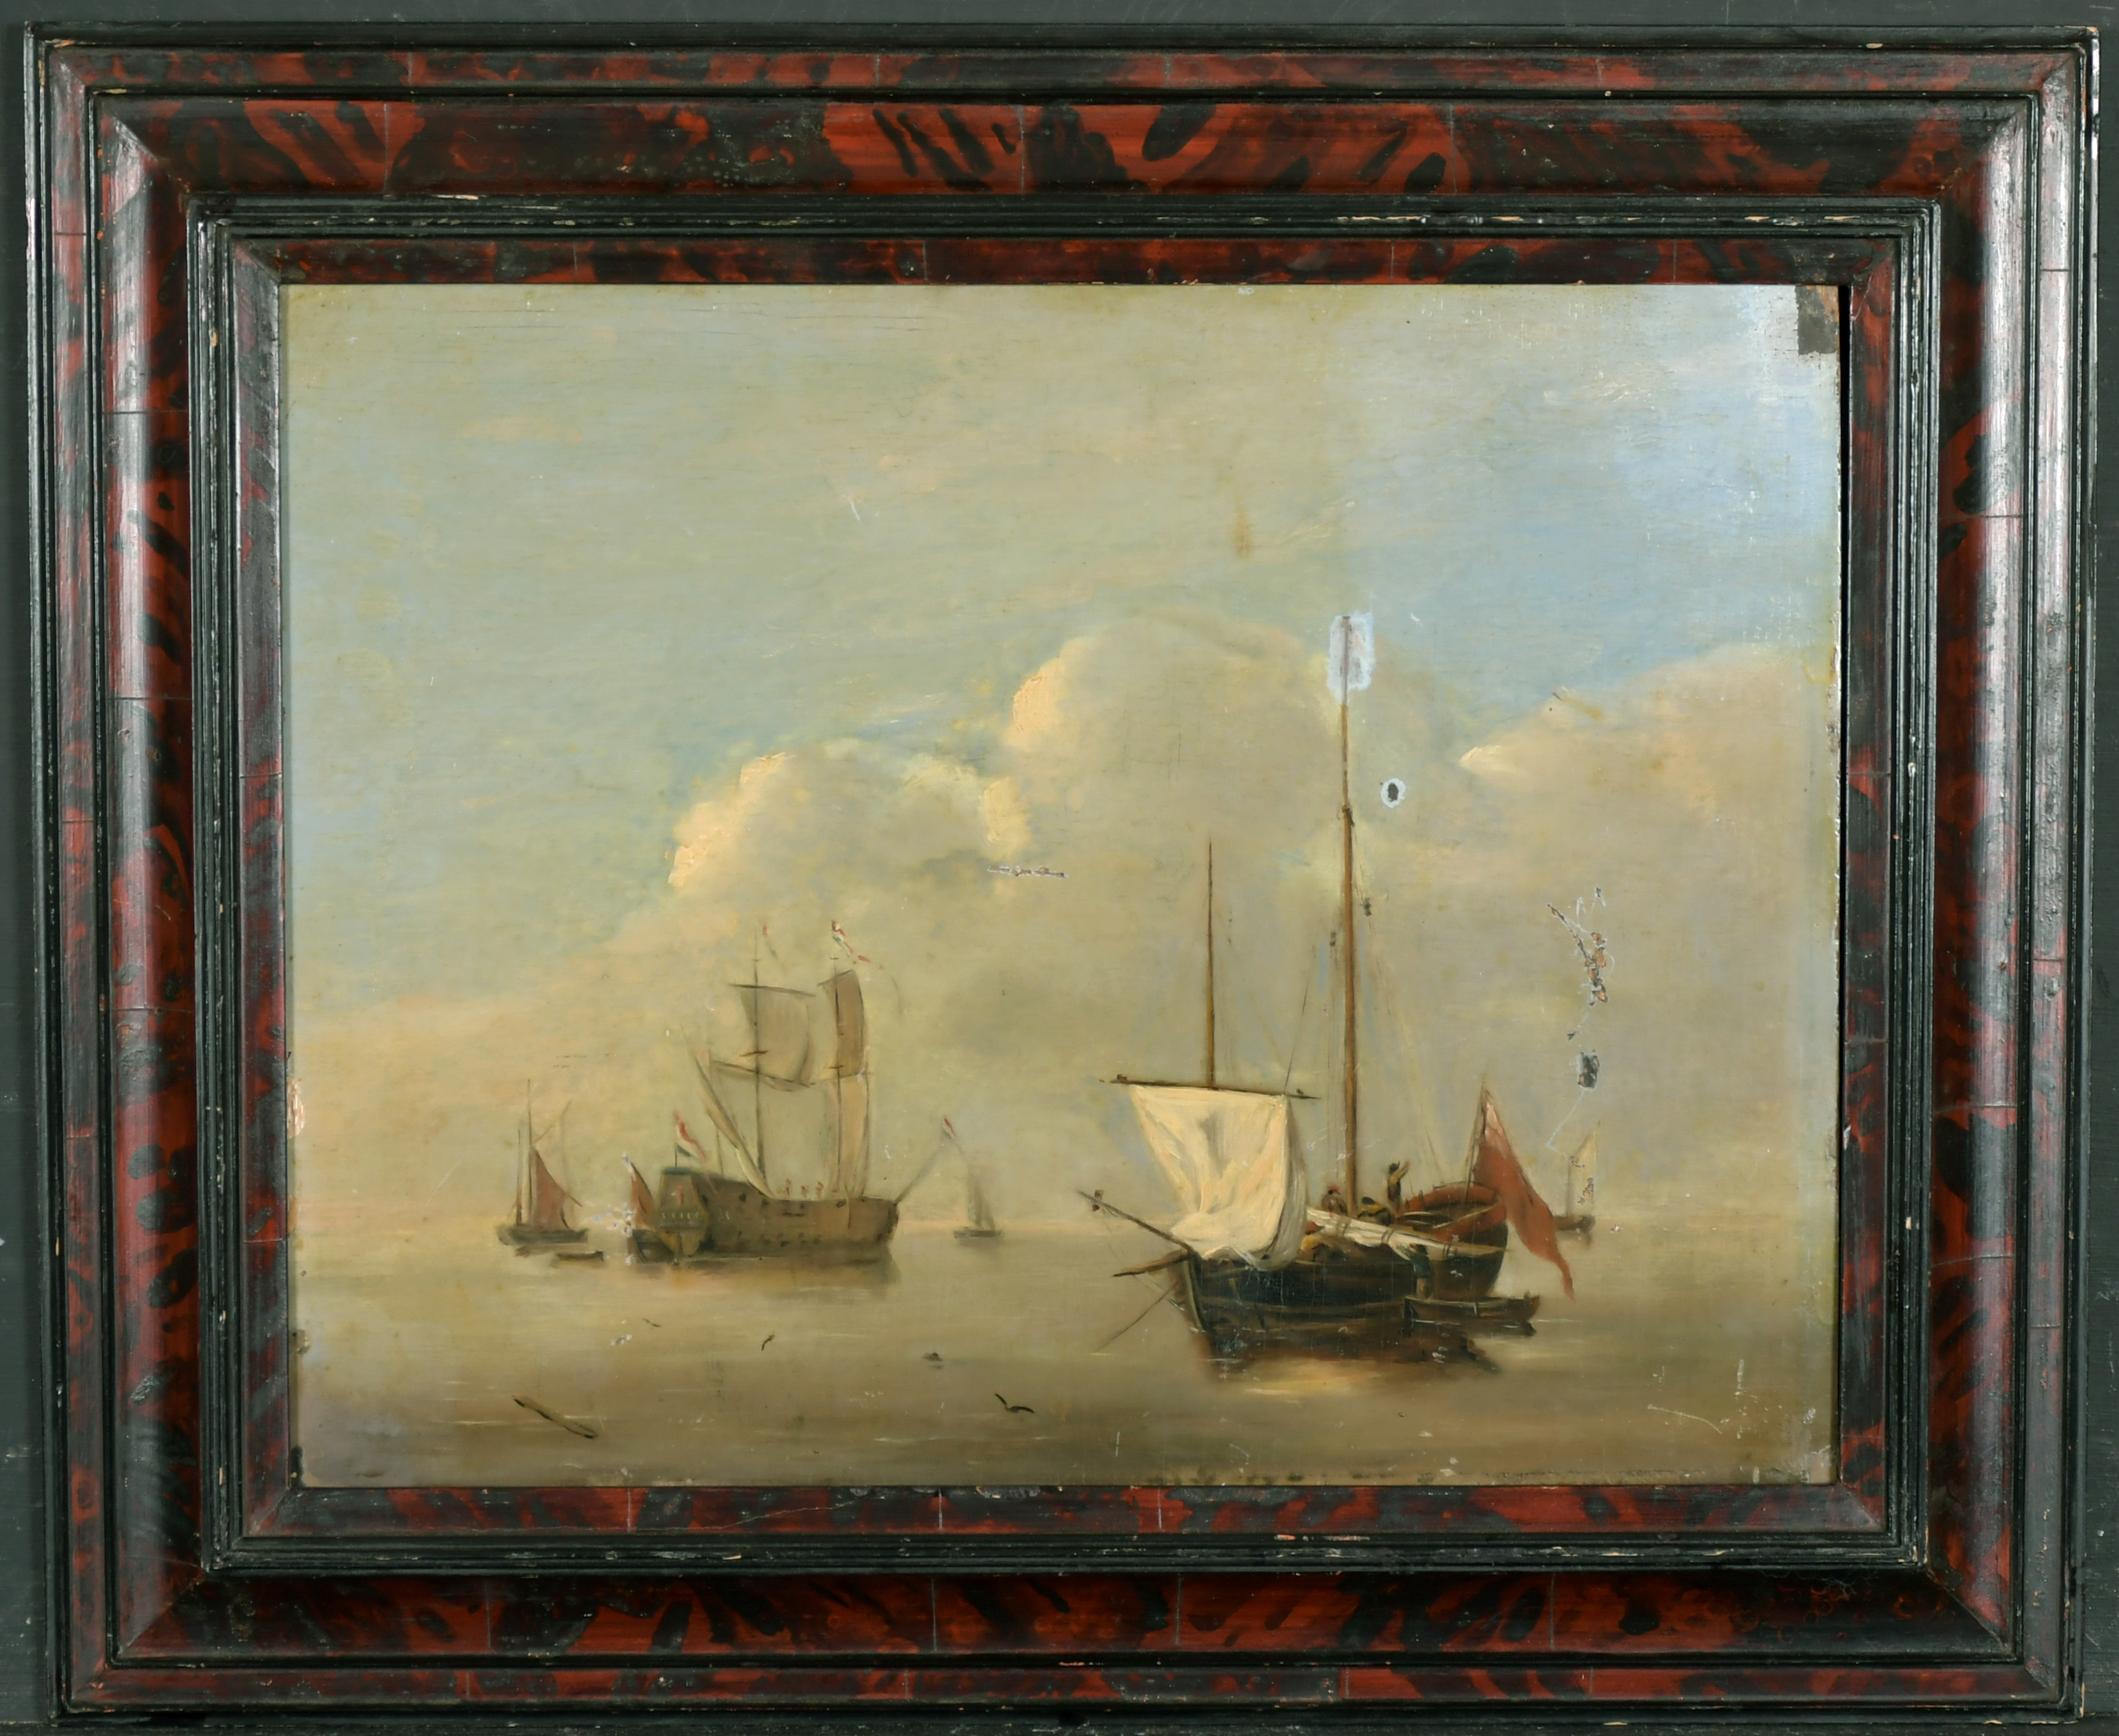 18th Century Dutch School. A Shipping Scene in Calm Waters, Oil on Panel, 10" x 12.75" (25.4 x 32. - Image 2 of 4